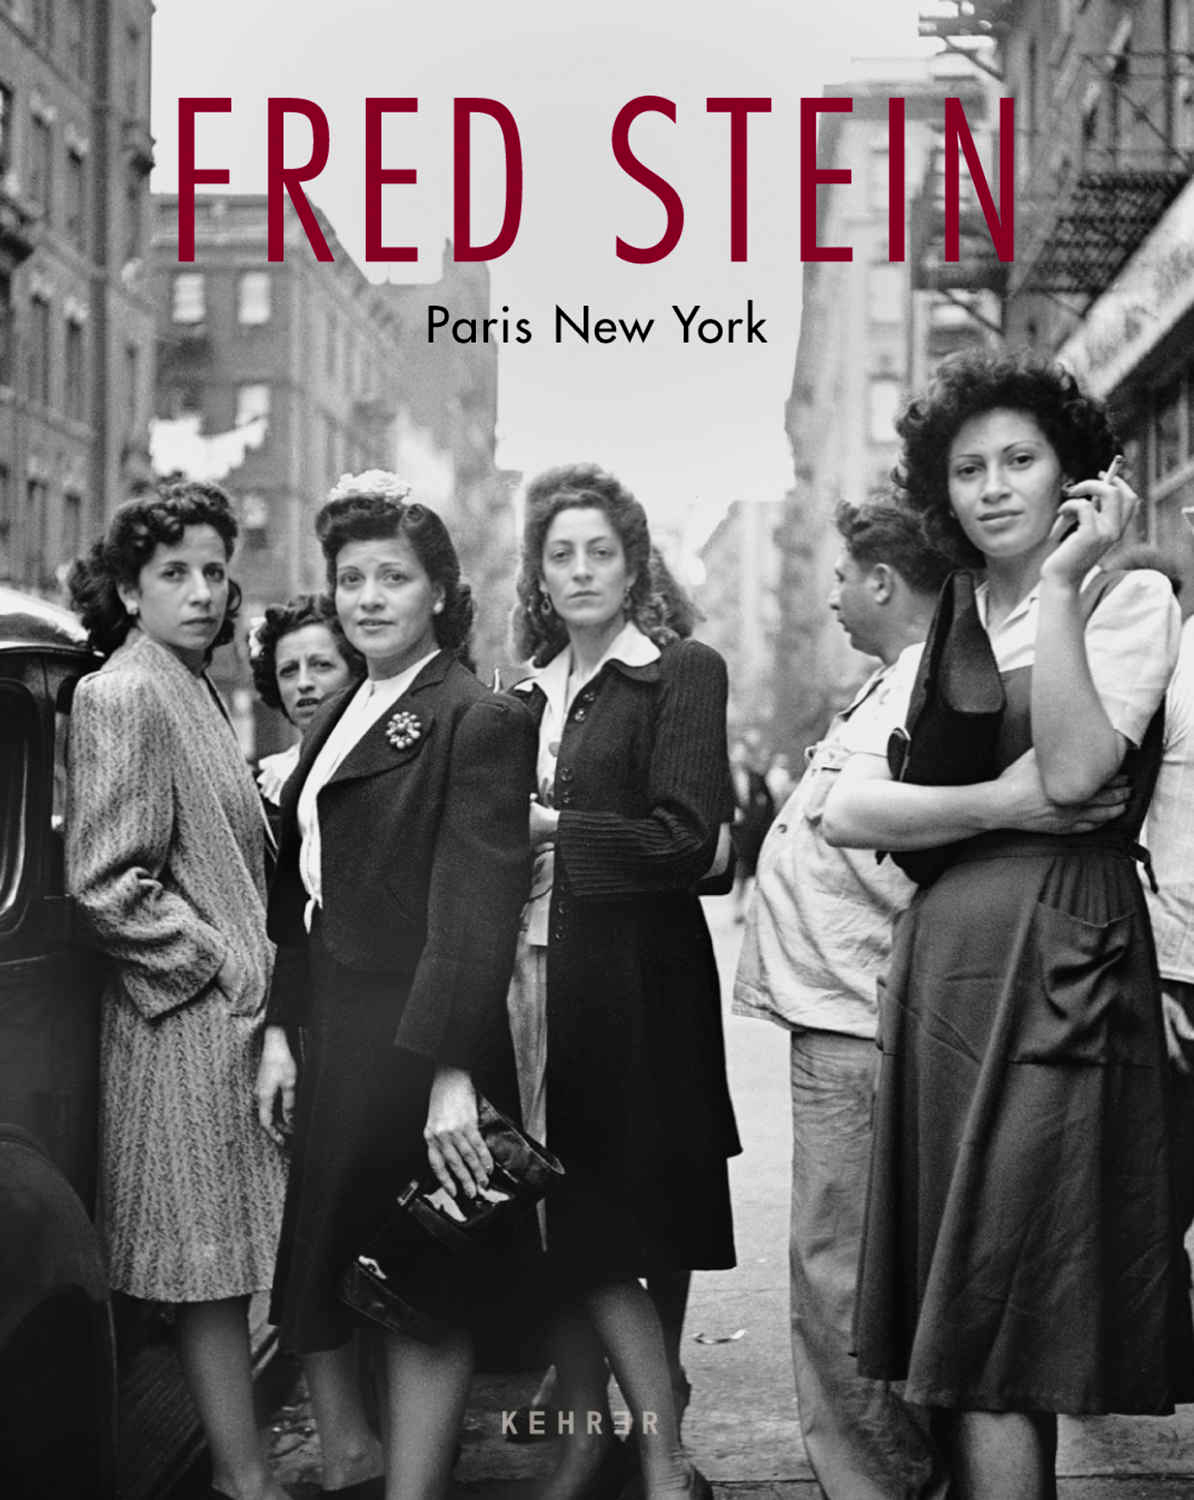 Book Launch: Paris New York by Fred Stein, with Peter Stein & Katherine Freer